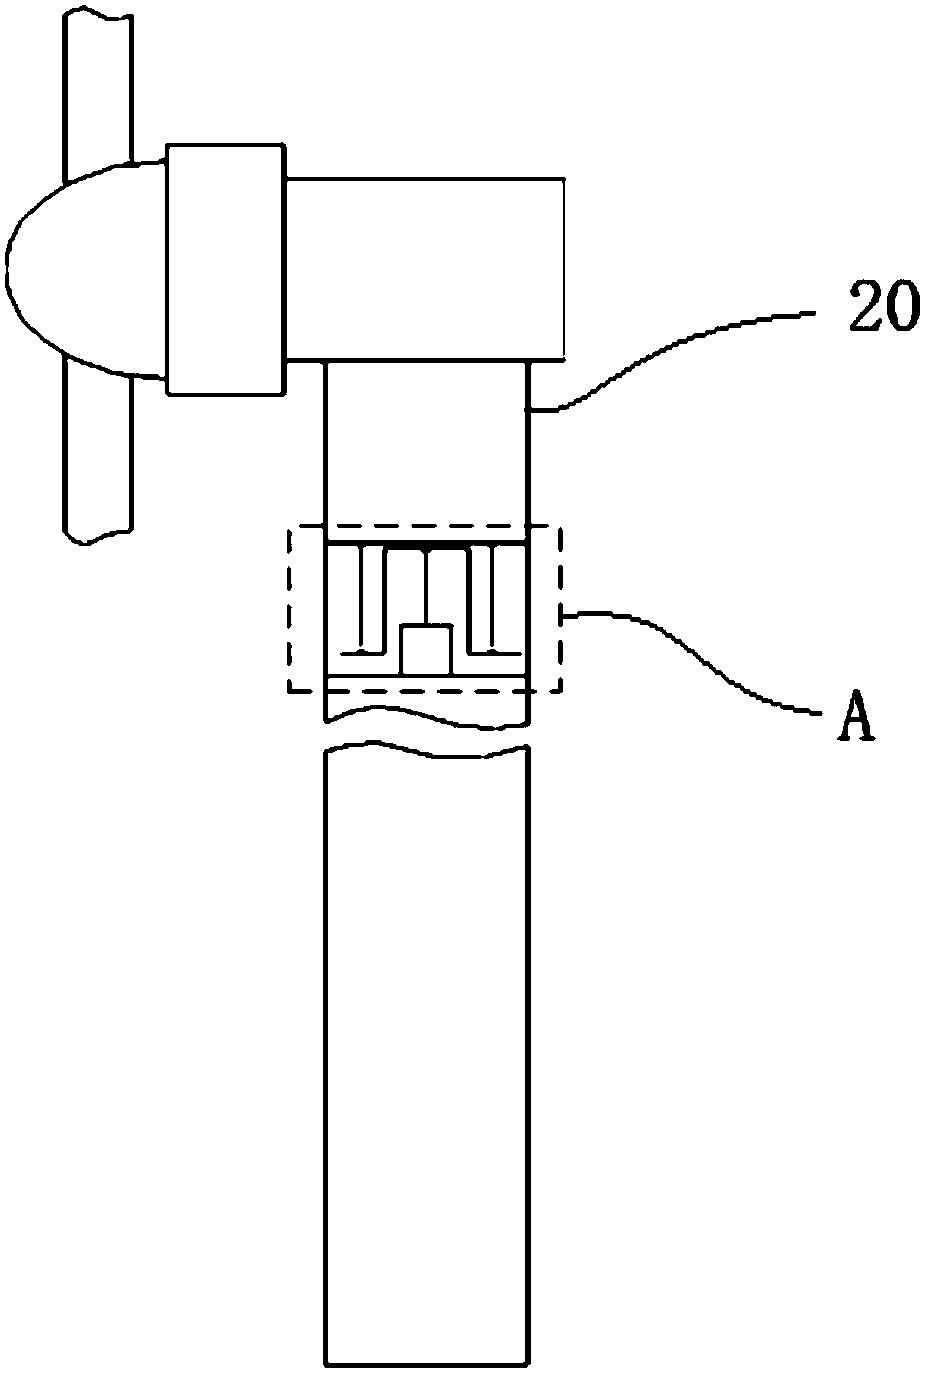 Anti-vibration device and tower device of wind turbine generator system